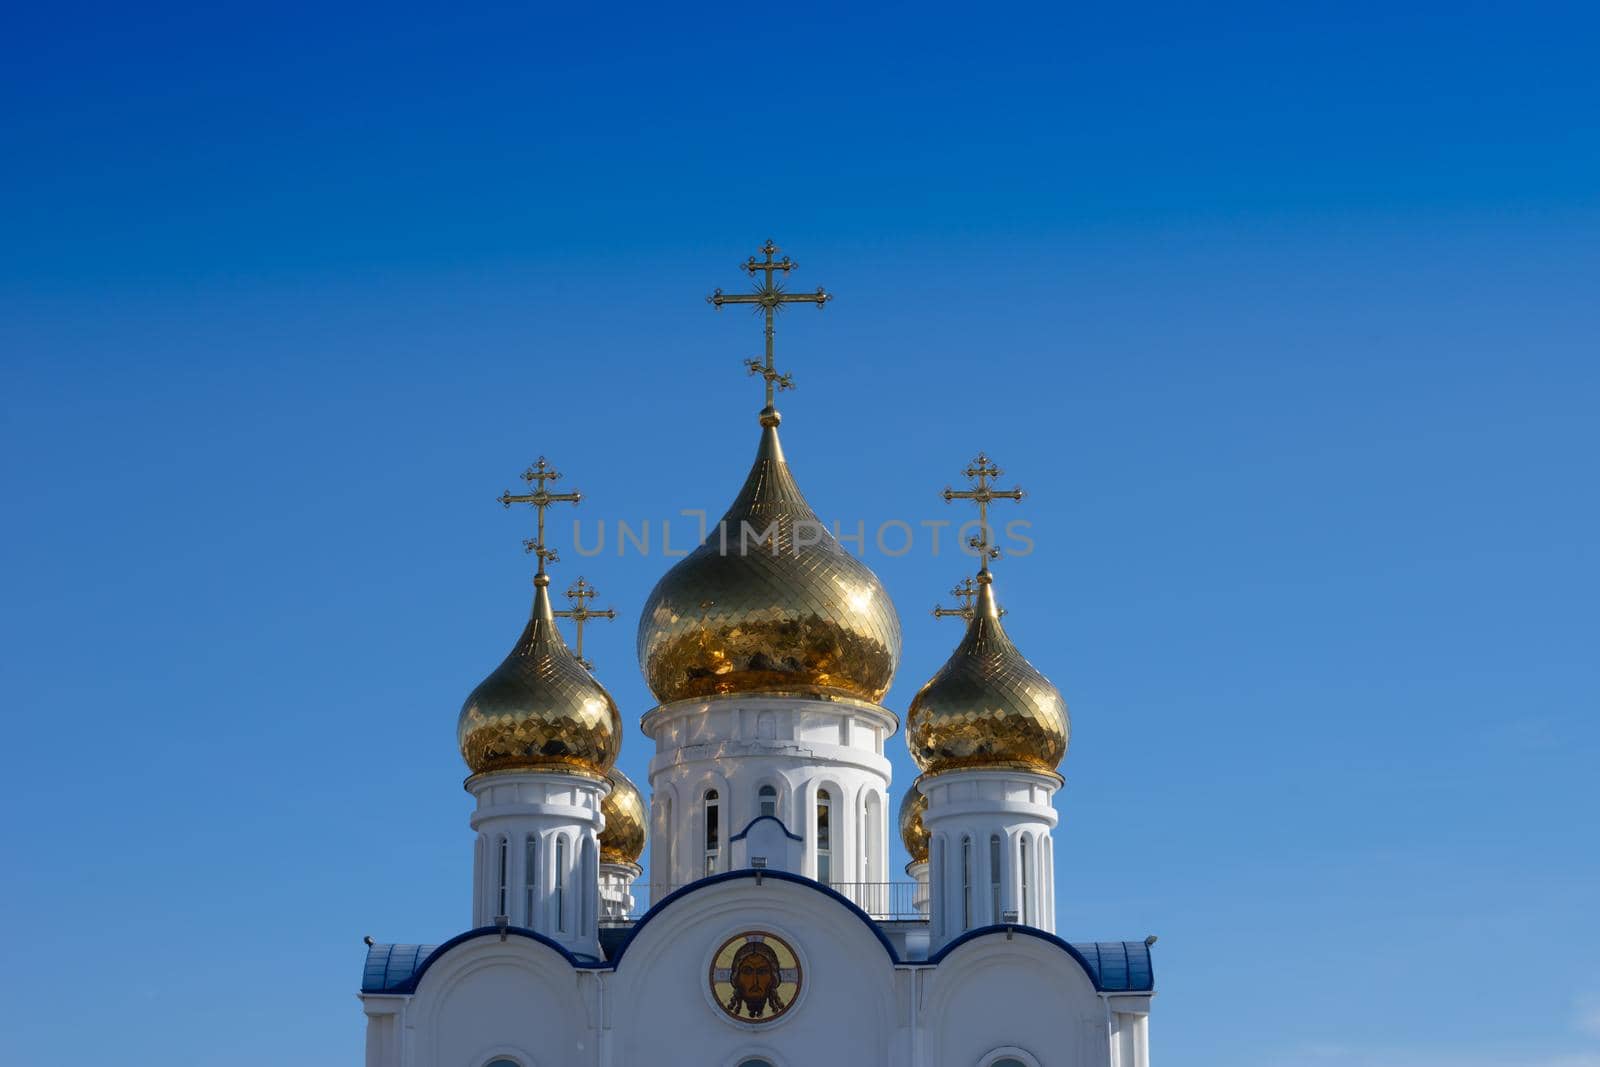 Golden domes of the Church of St. Nicholas against the blue sky. Petropavlovsk-Kamchatsky, Russia.